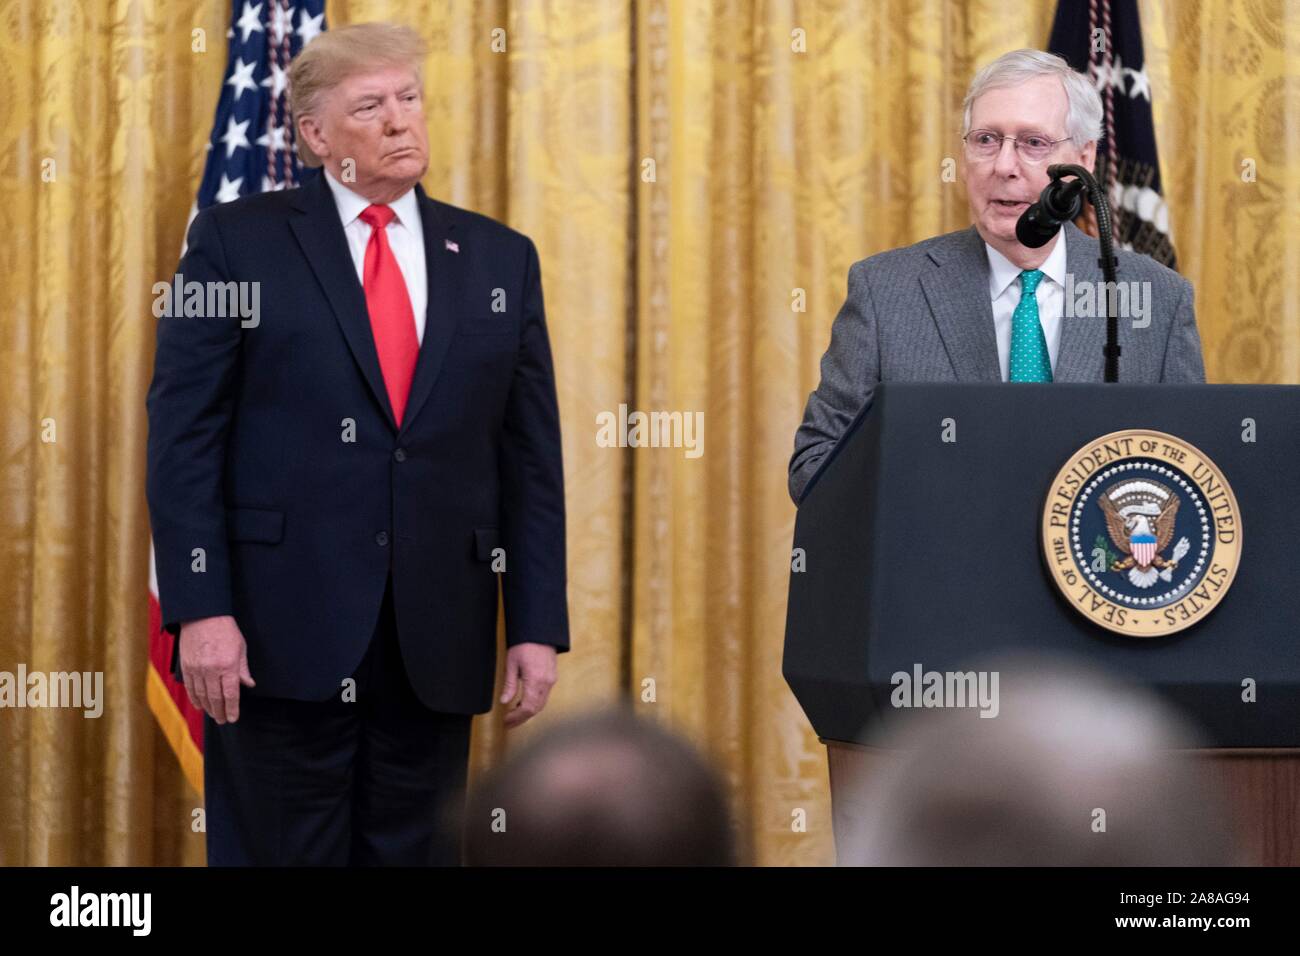 U.S. President Donald Trump listens as Senator Majority Leader Mitch McConnell delivers remarks on the federal judicial confirmation milestones in the East Room of the White House November 6, 2019 in Washington, DC. Stock Photo